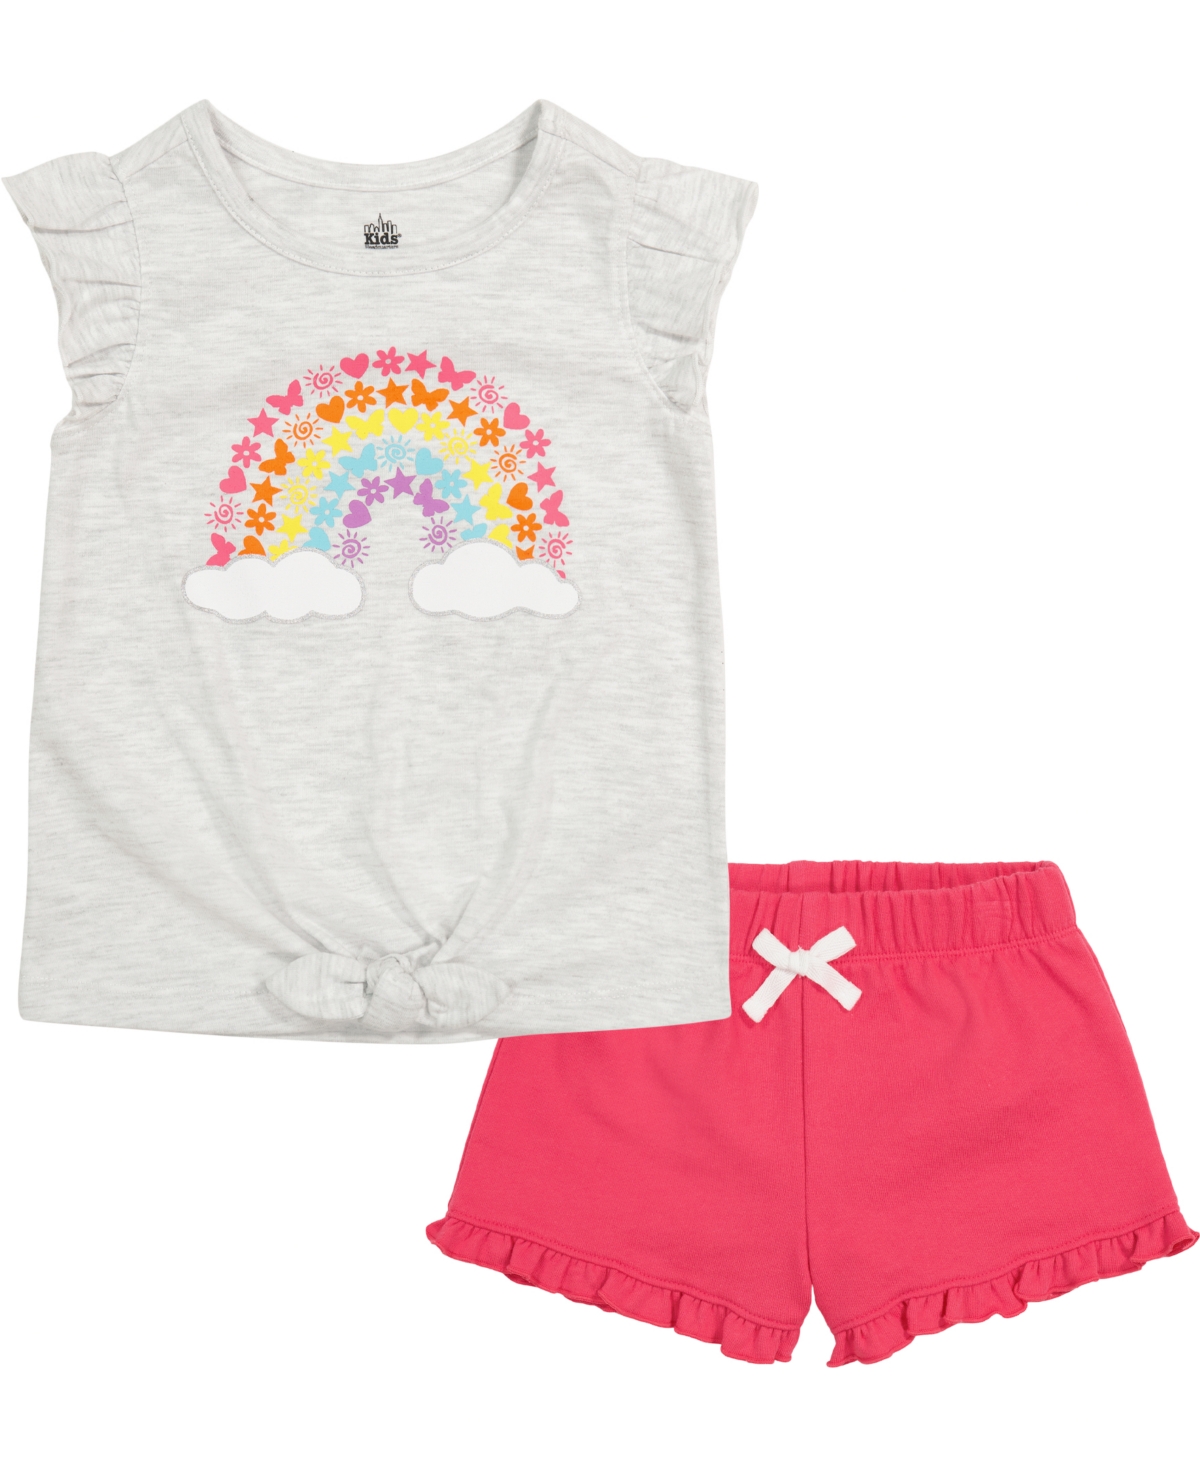 Kids Headquarters Toddler Girls Flutter Sleeve Rainbow T-shirt And French Terry Shorts, 2 Piece Set In Gray Heather